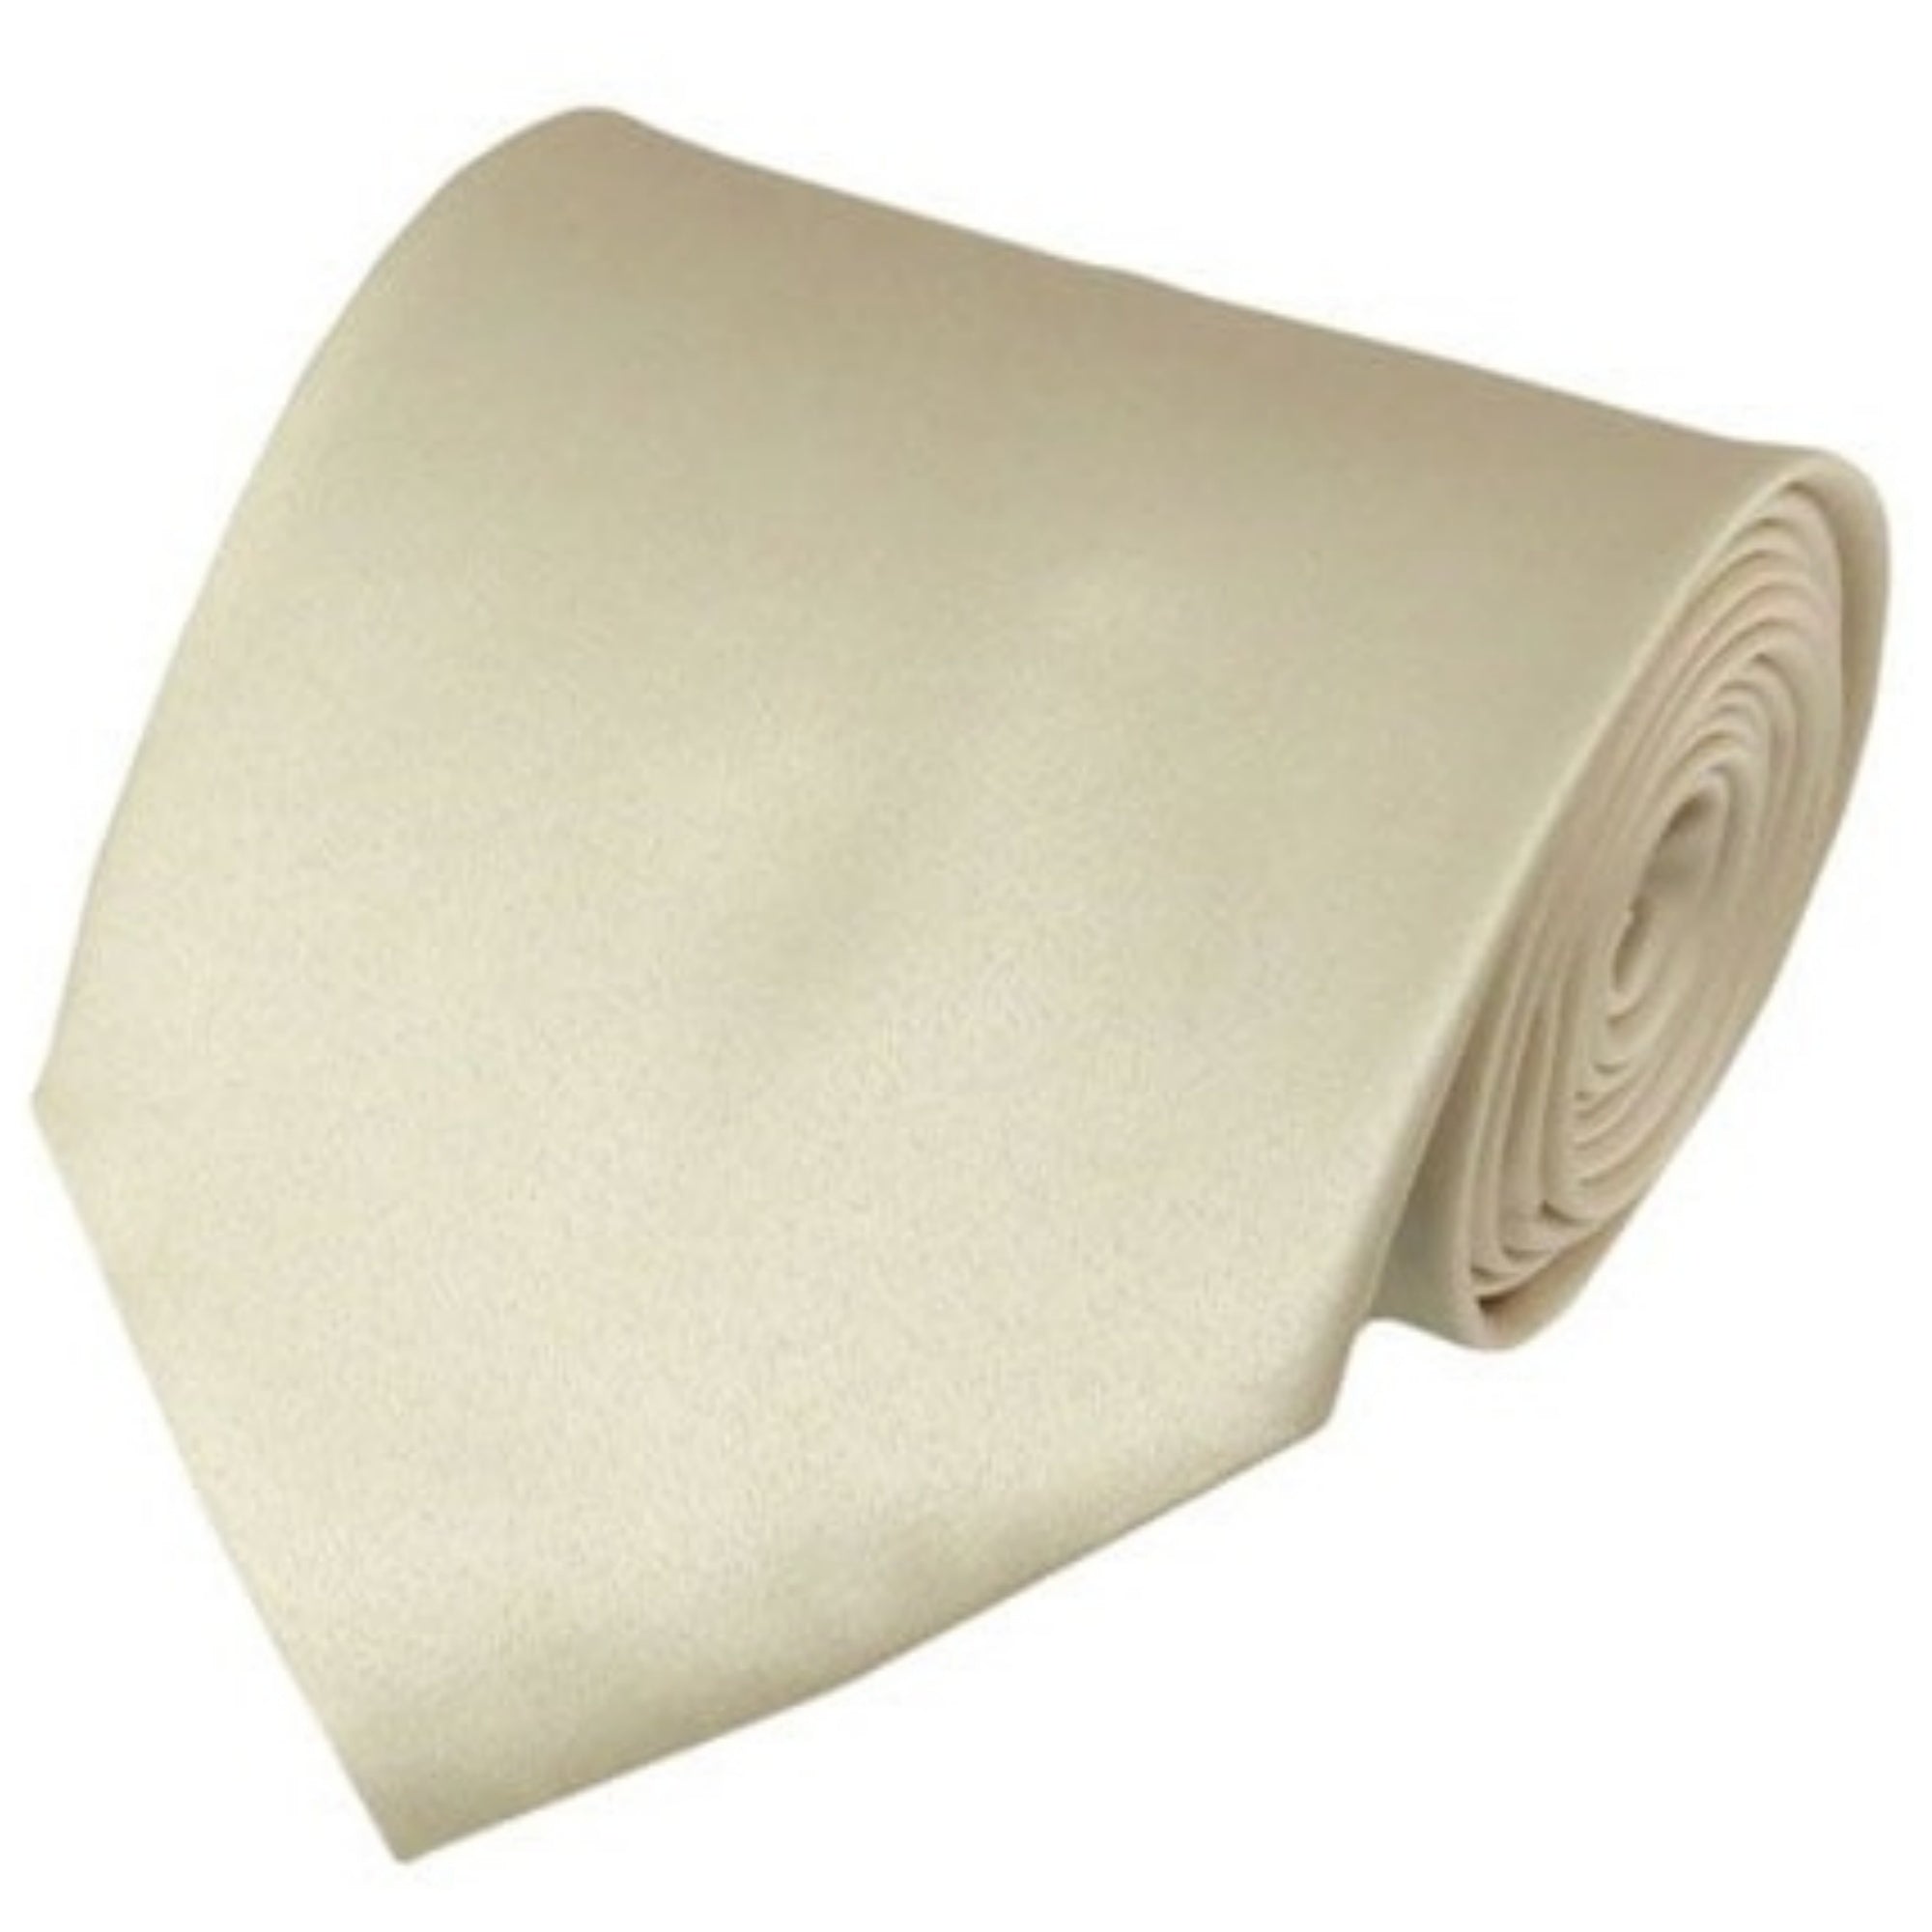 TheDapperTie Solid Color 3.5 Inch Wide And 62 Inch Extra Long Necktie For Big & Tall Men Neck Tie TheDapperTie Cream  